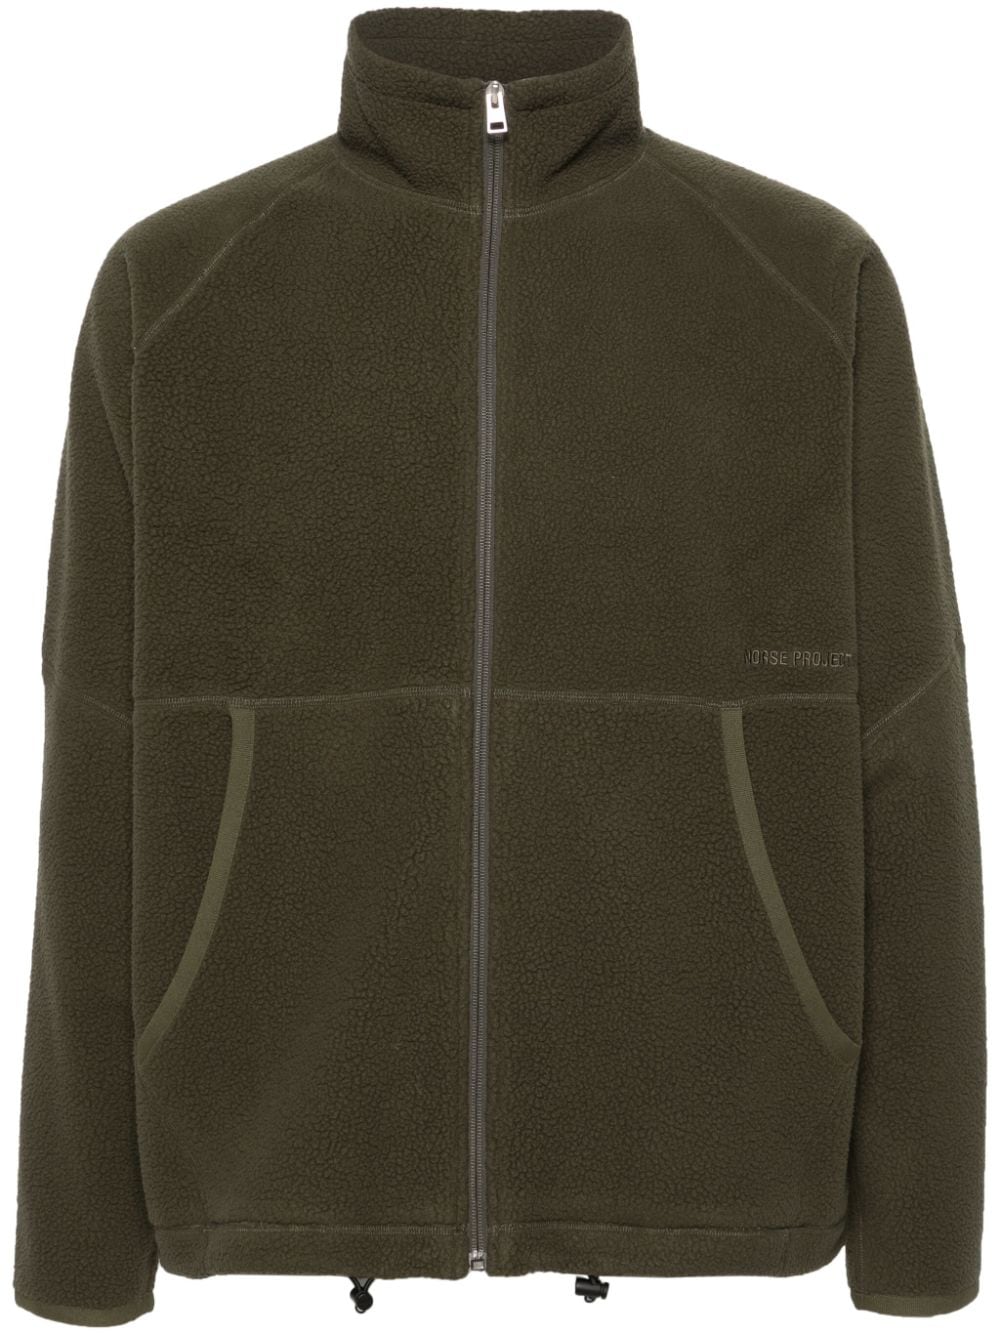 Norse Projects Tycho fleece zip-up jacket - Green von Norse Projects